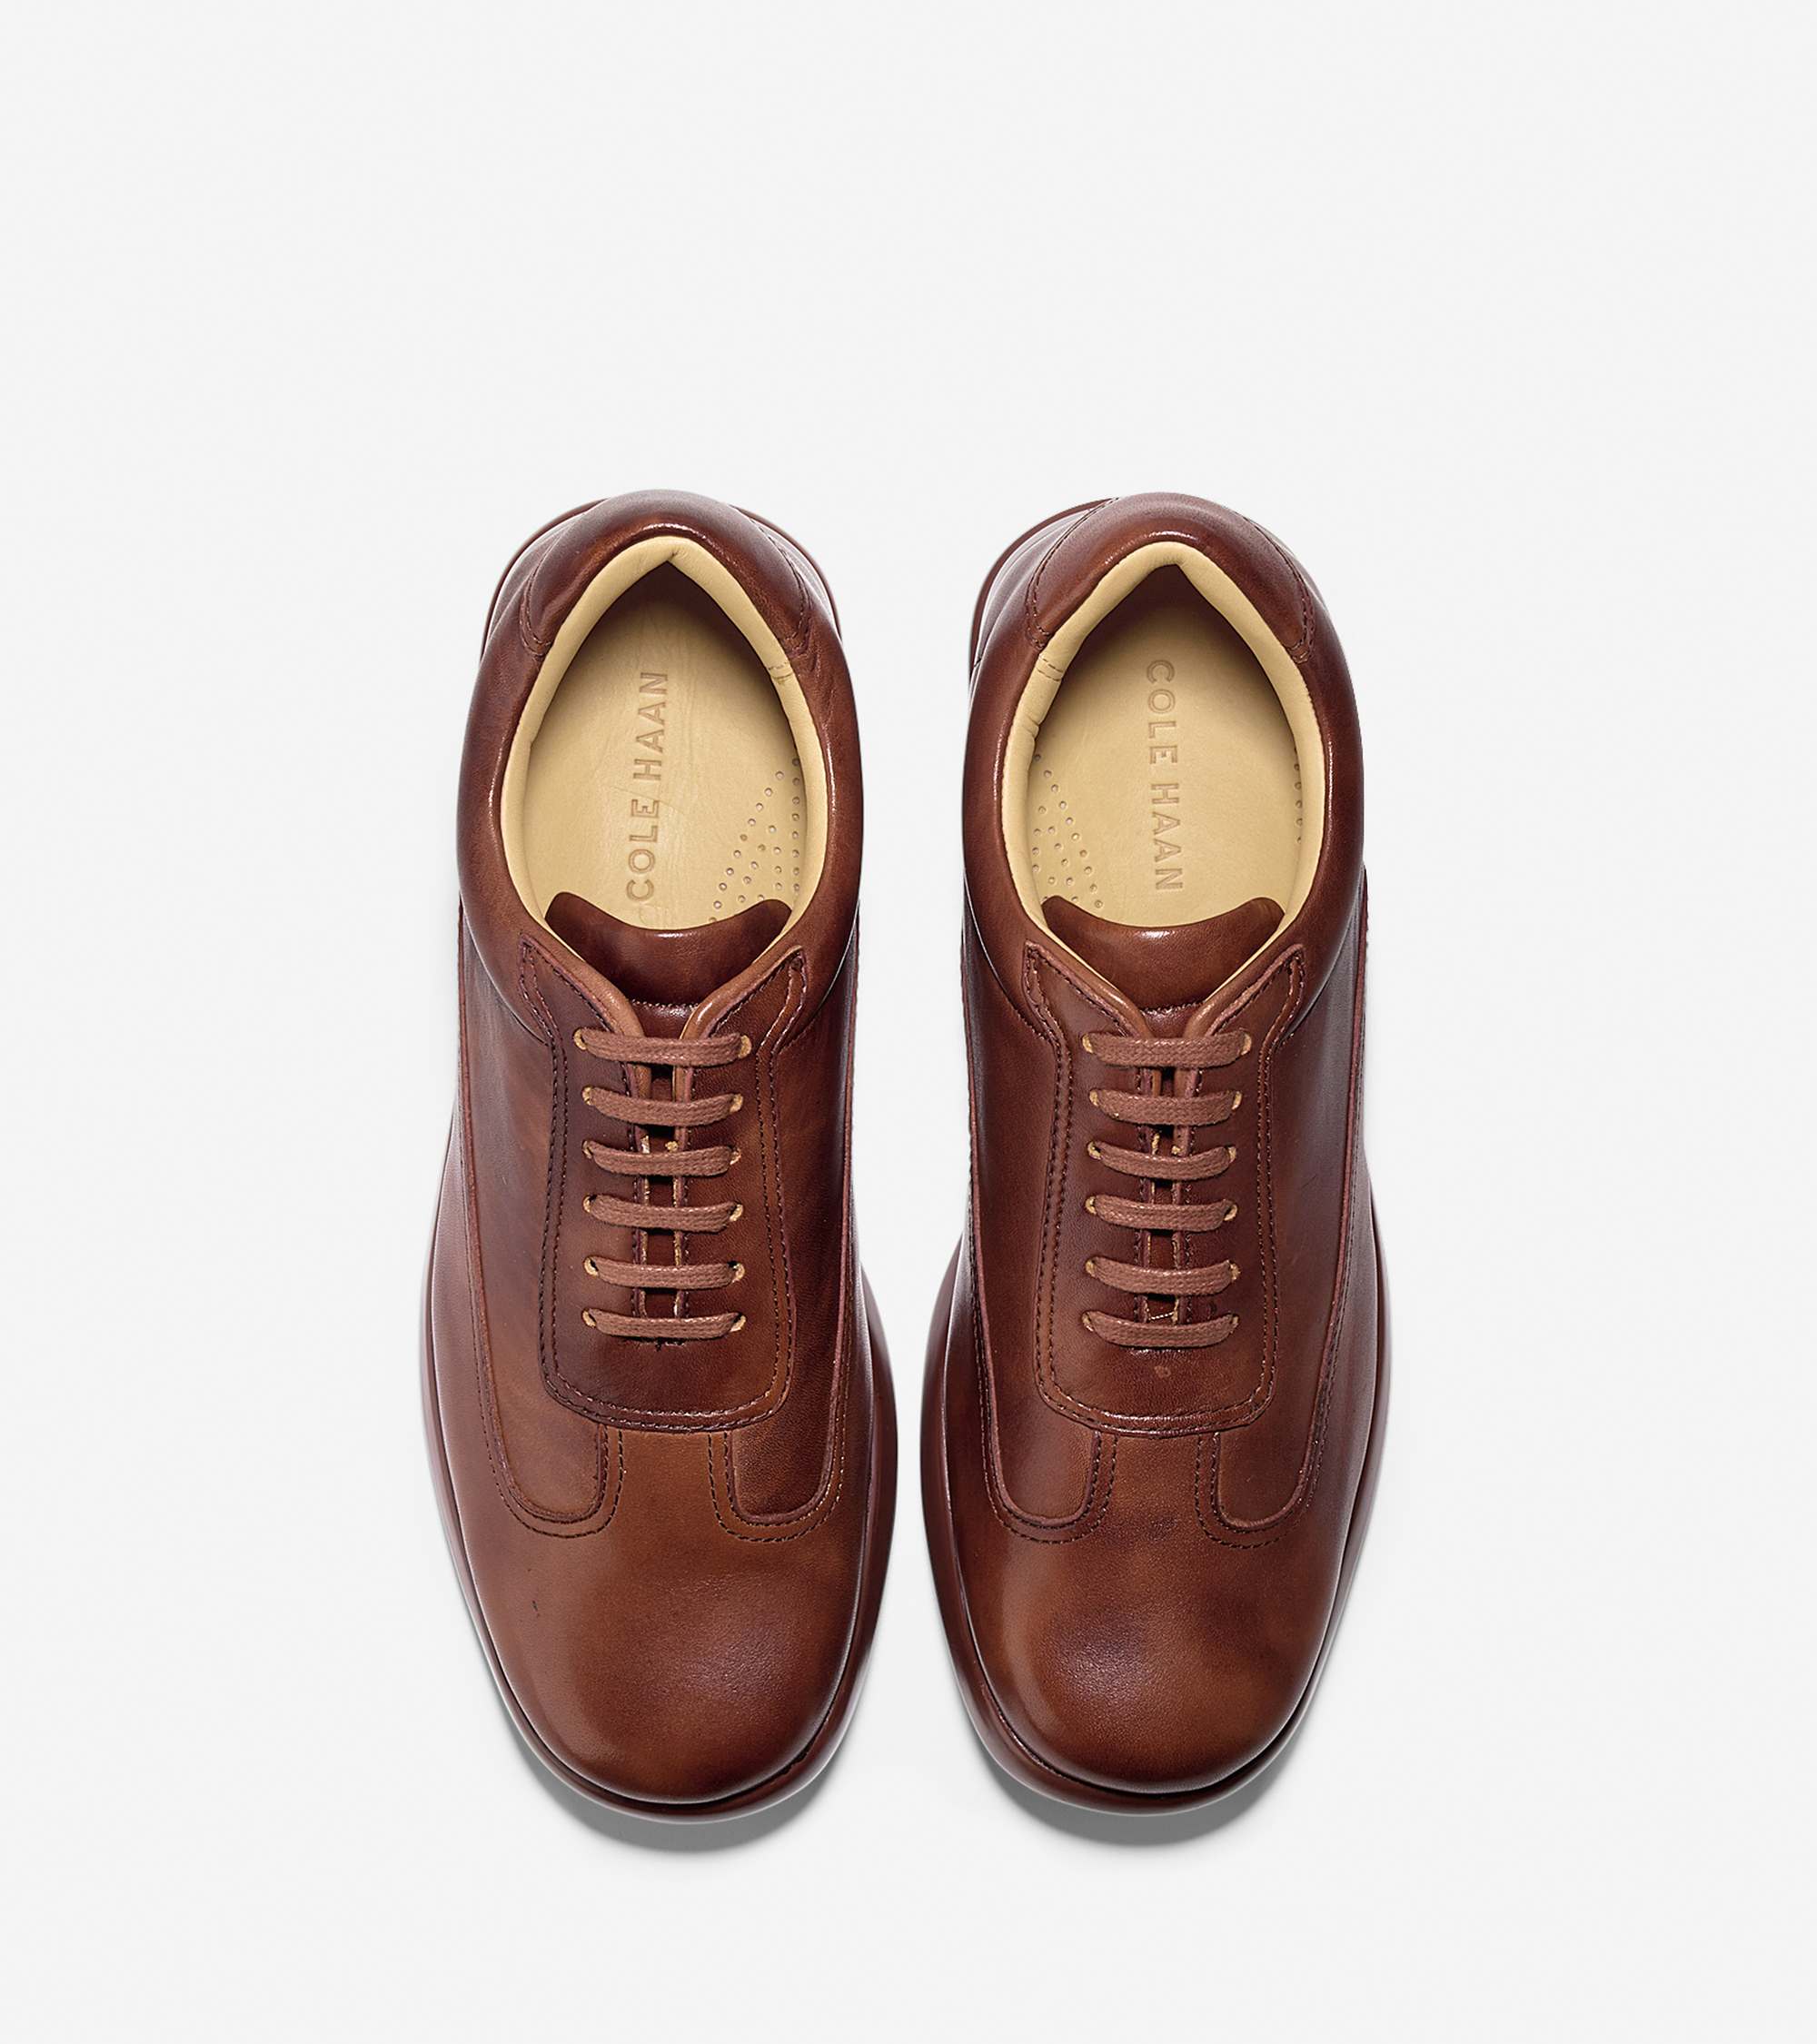 Lyst - Cole Haan Air Conner Leather Low-Top Oxford Sneakers in Brown ...